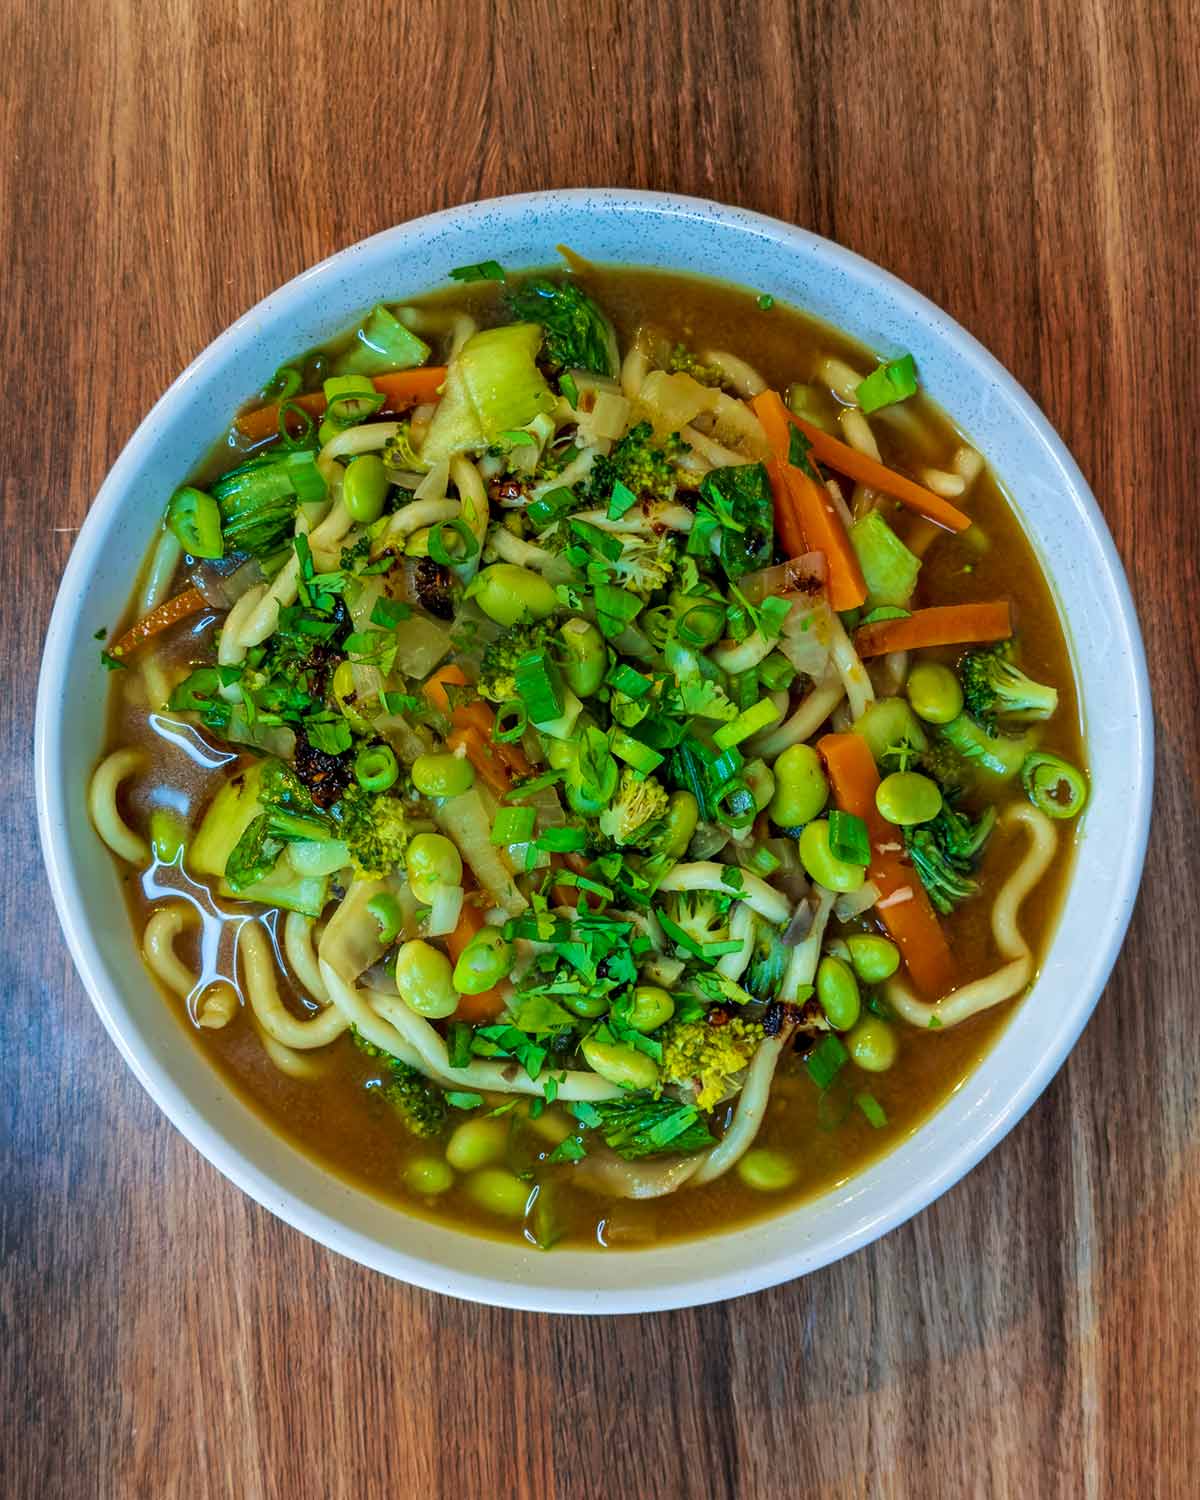 The noodles soup transferred to a bowl.